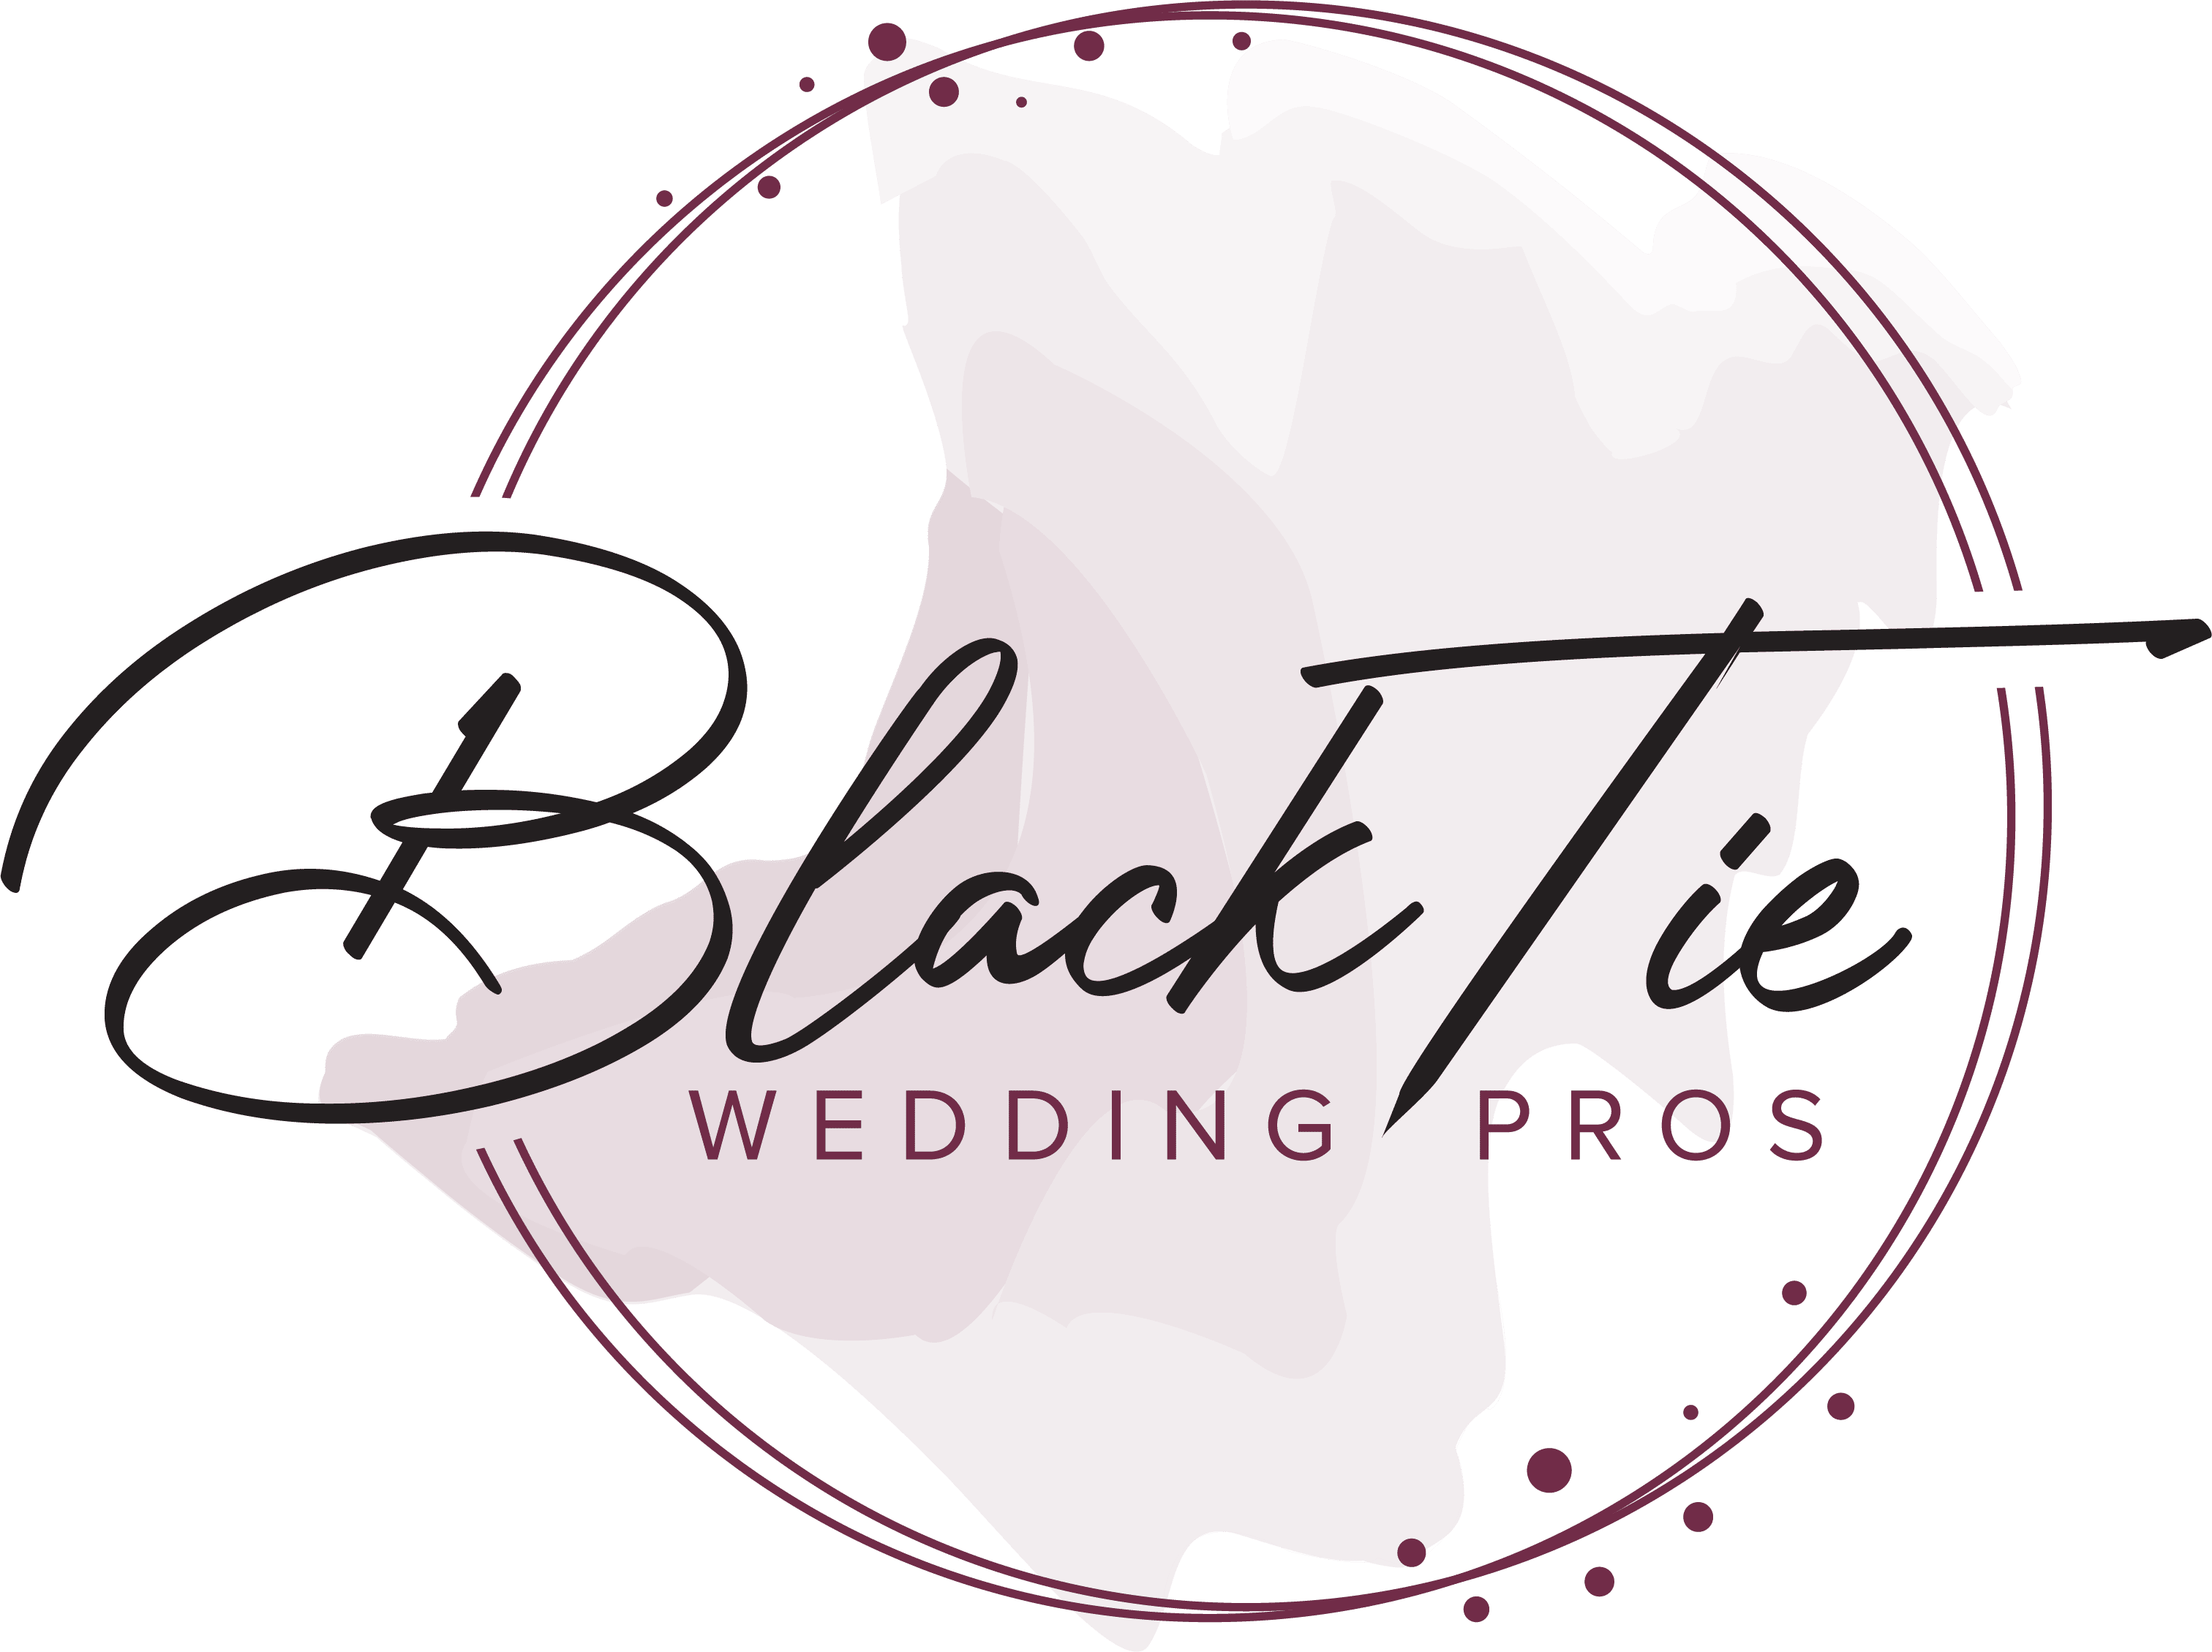 Black Tie Wedding Pros Presents: A Masterclass with Alan Berg - From the Inquiry to the Sale